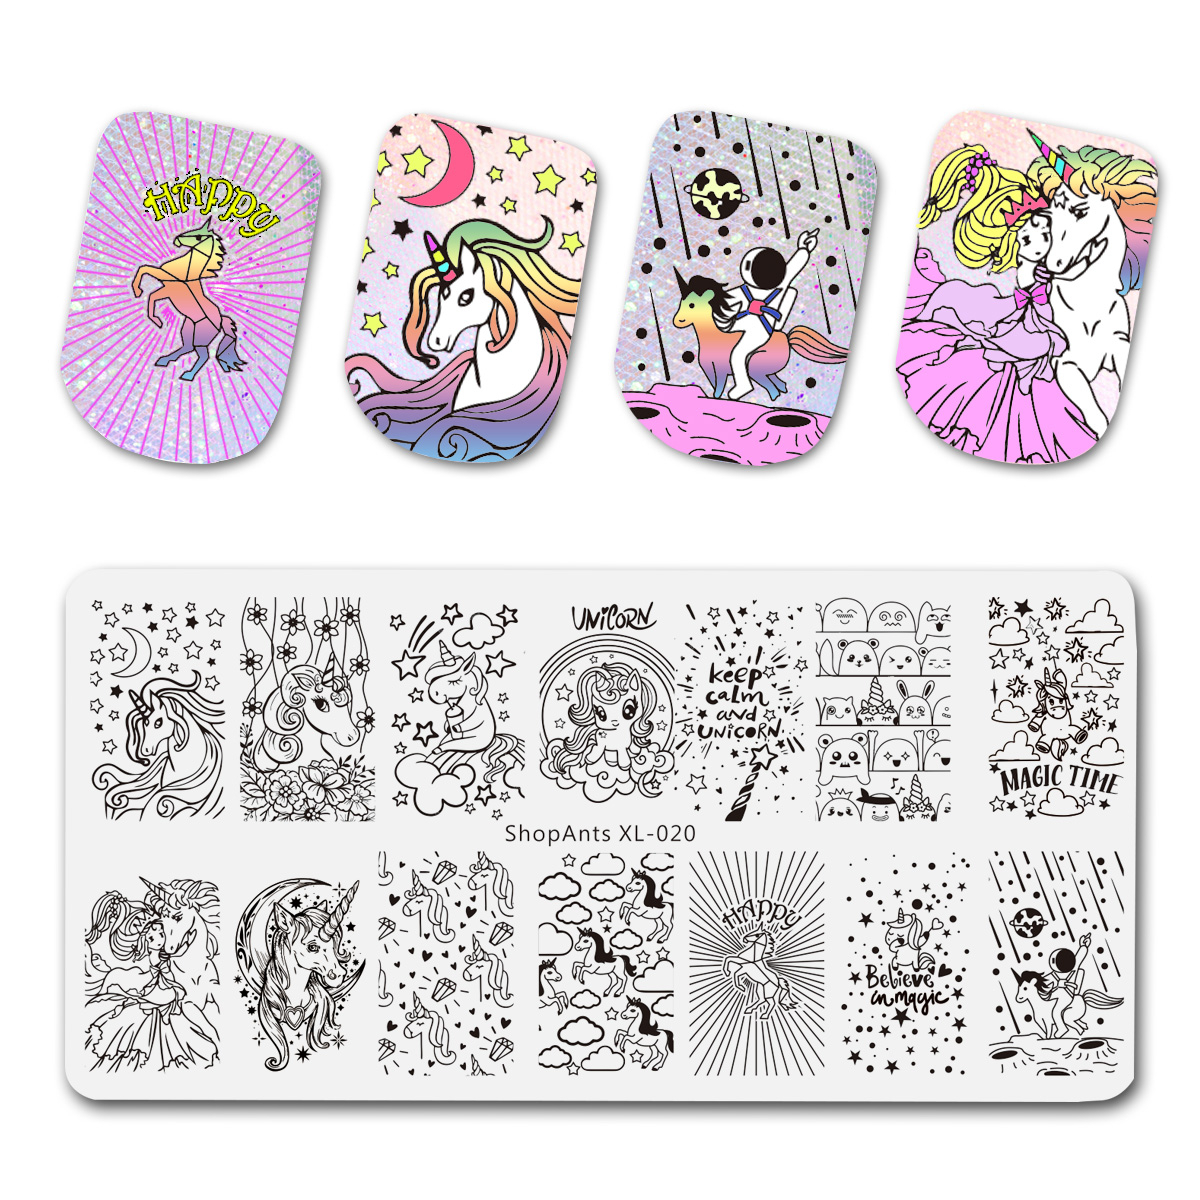 6*12cm Cute Unicorn Nail Stamping Plates Stainless Steel Cloud Heart Rose Star Stripe Pattern Stencil Nail Art Stamp Templates